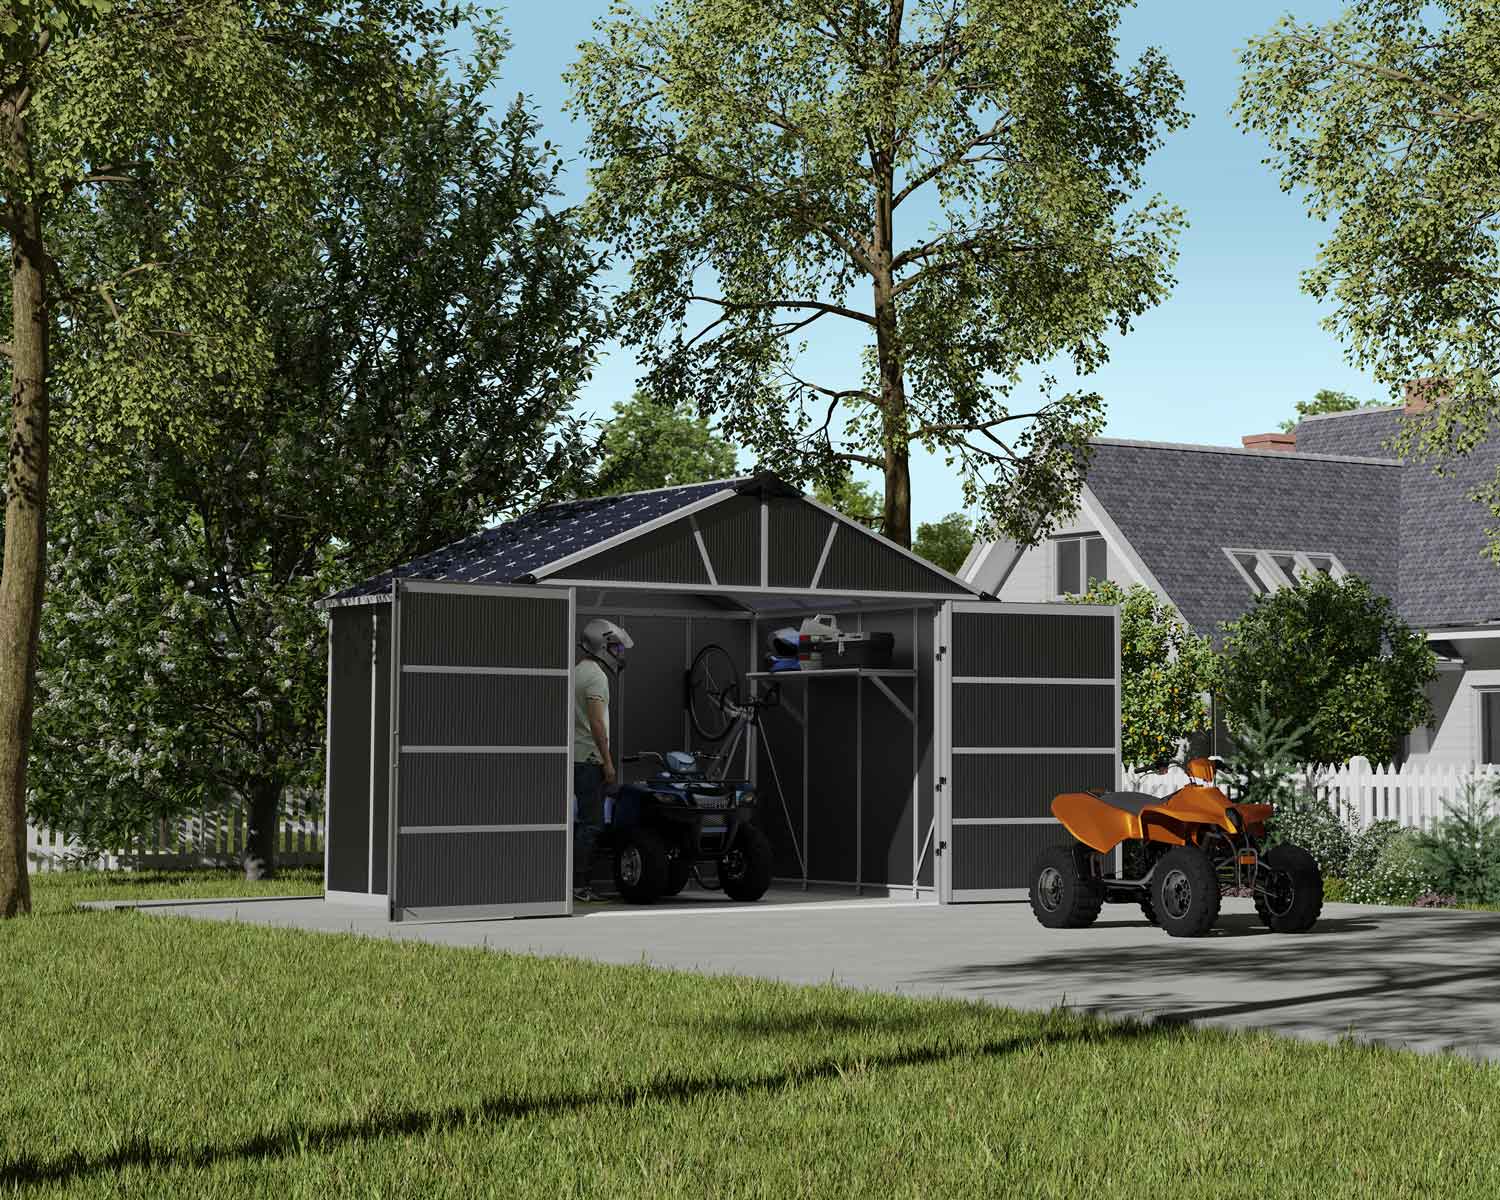 Yukon 11' x 9' Dark Grey Polycarbonate Multiwall and Aluminum Frame. ATV parked in a Plastic Garage Shed with Double Door.